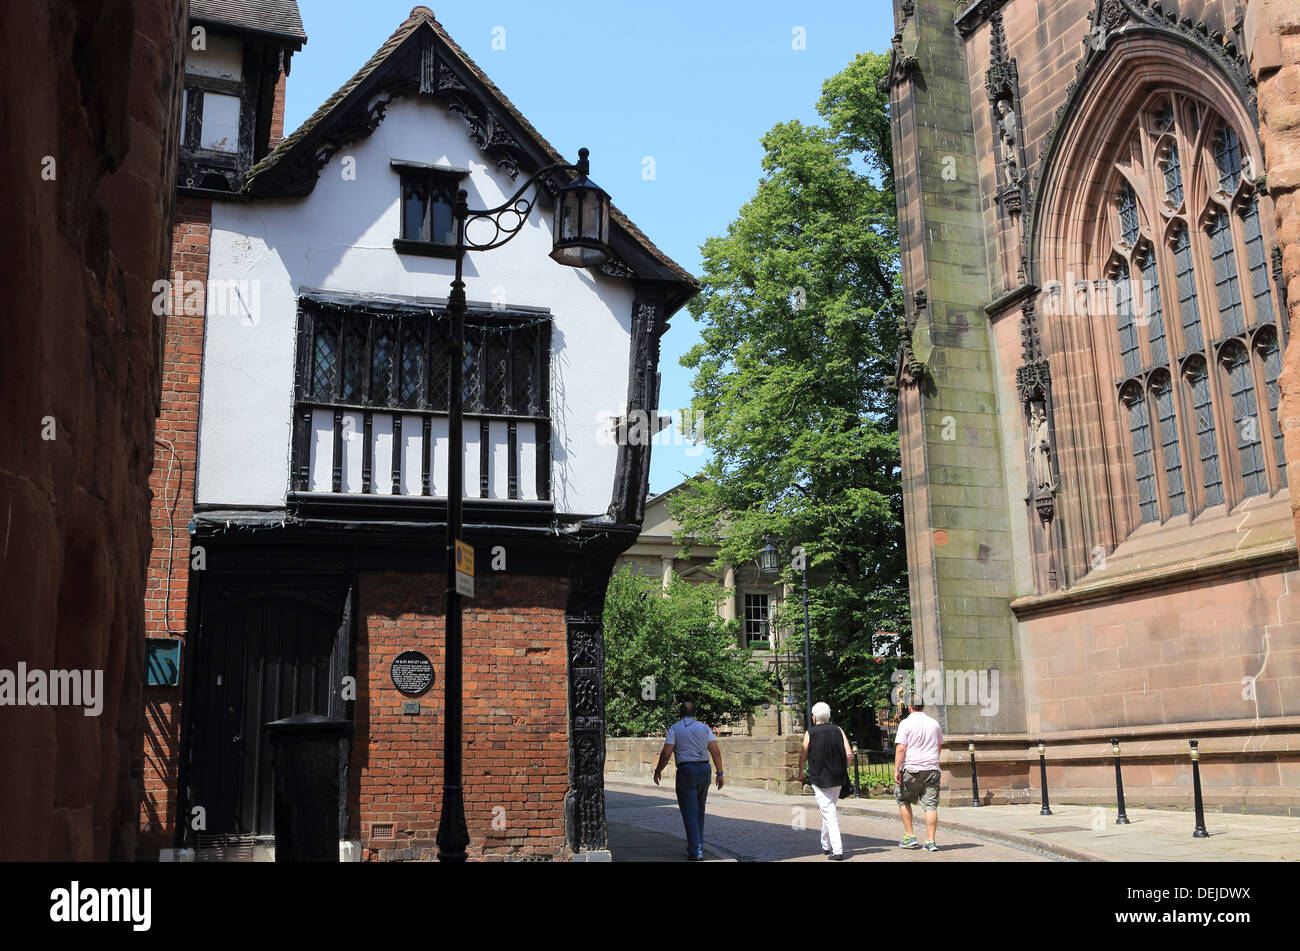 22 and 23 Bayley Lane, medieval timber framed houses, next to the old Cathedral ruins, in Coventry, West Midlands, England, UK Stock Photo